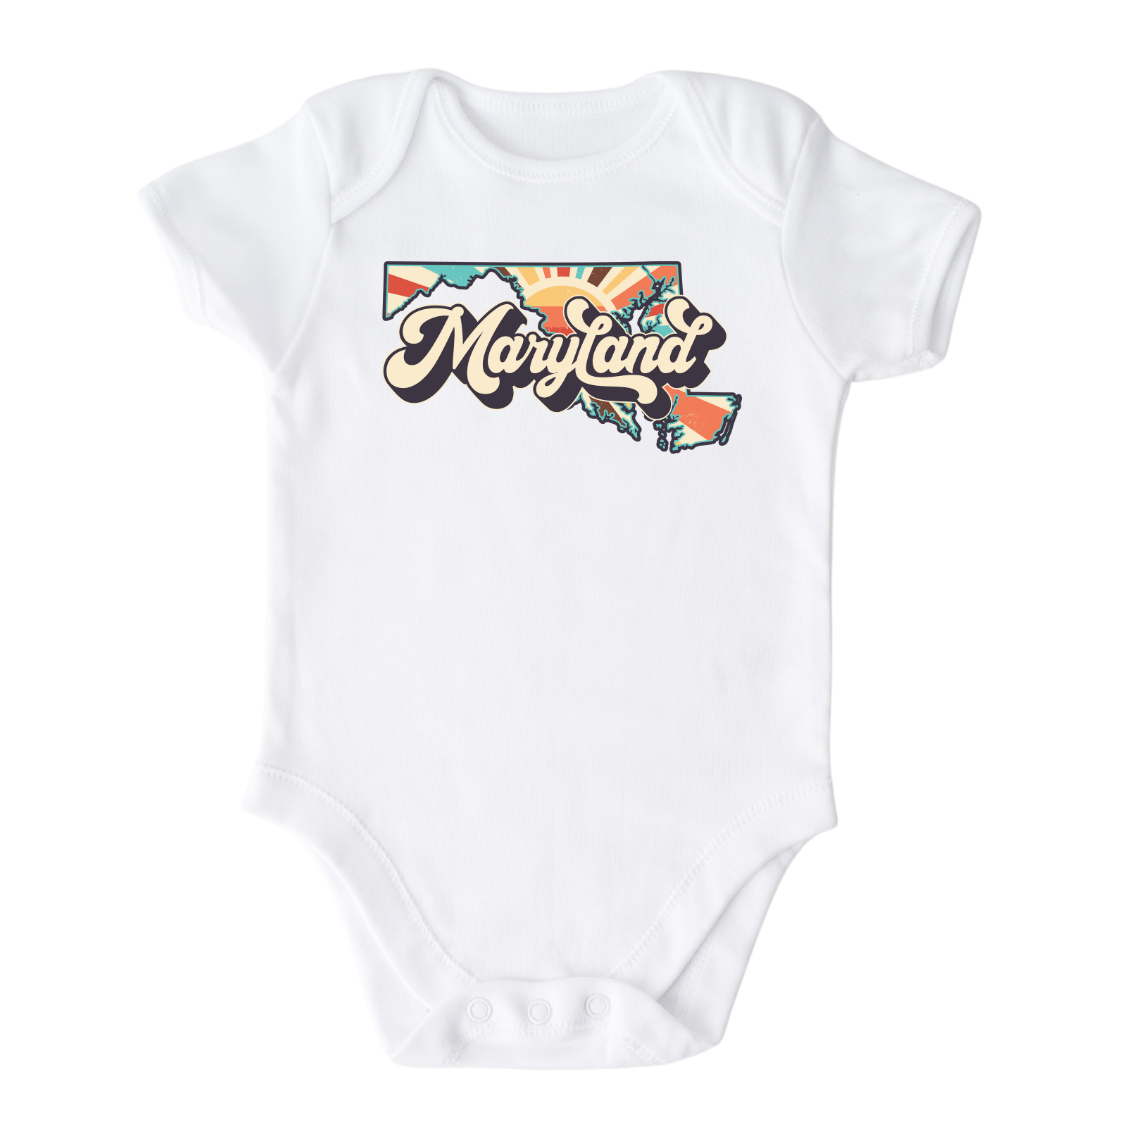 Maryland Baby Onesie® Maryland State Shirt for Kids Tshirt Maryland Bodysuit for Baby Gift